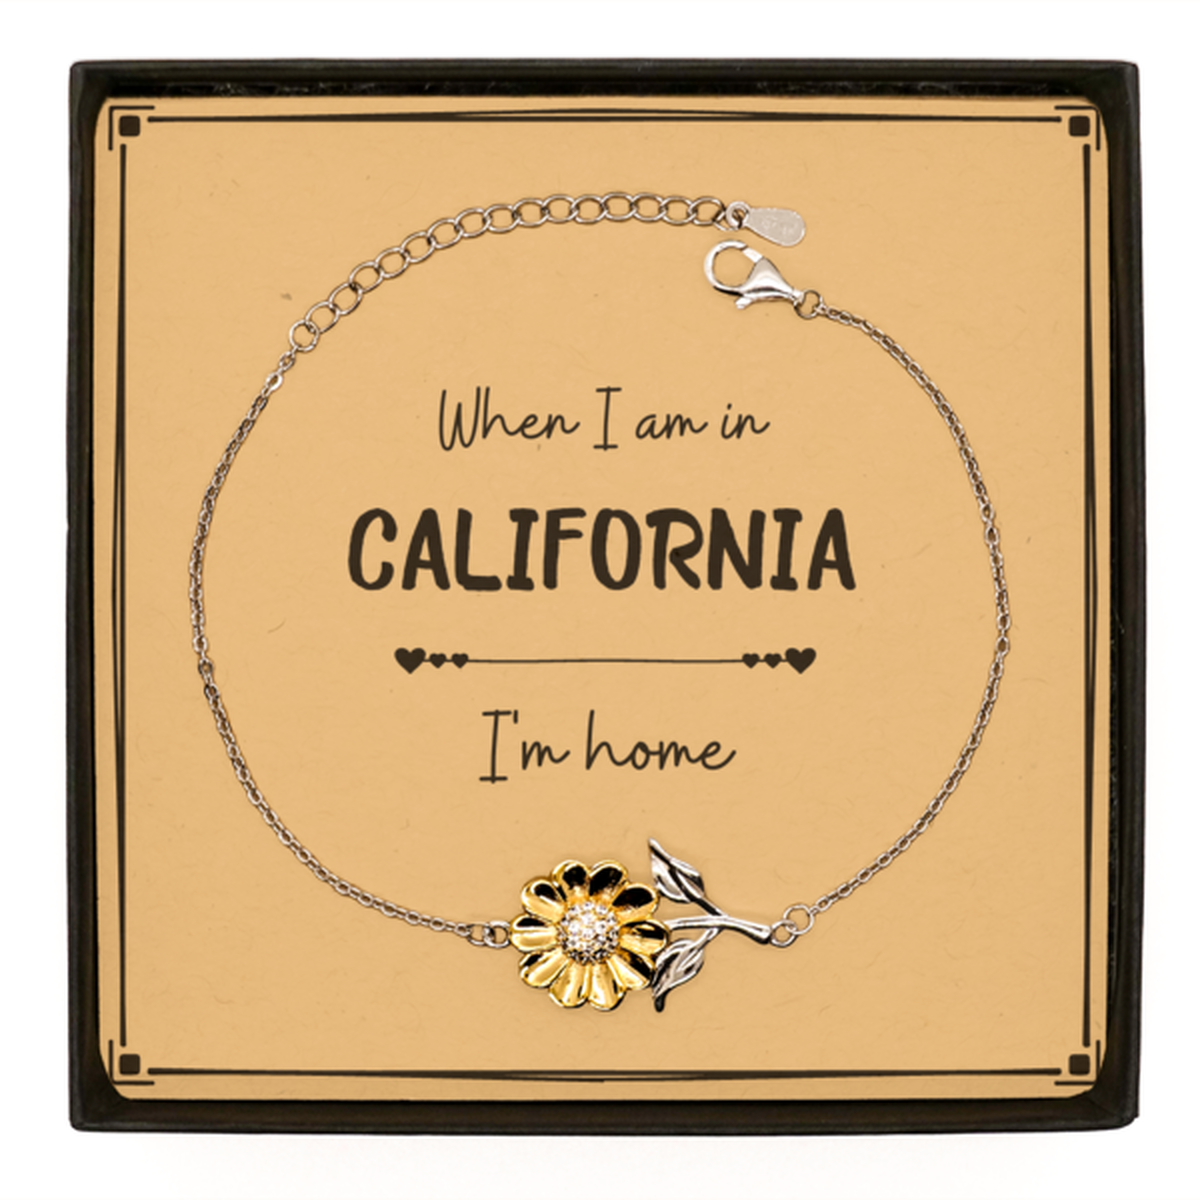 When I am in California I'm home Sunflower Bracelet, Message Card Gifts For California, State California Birthday Gifts for Friends Coworker